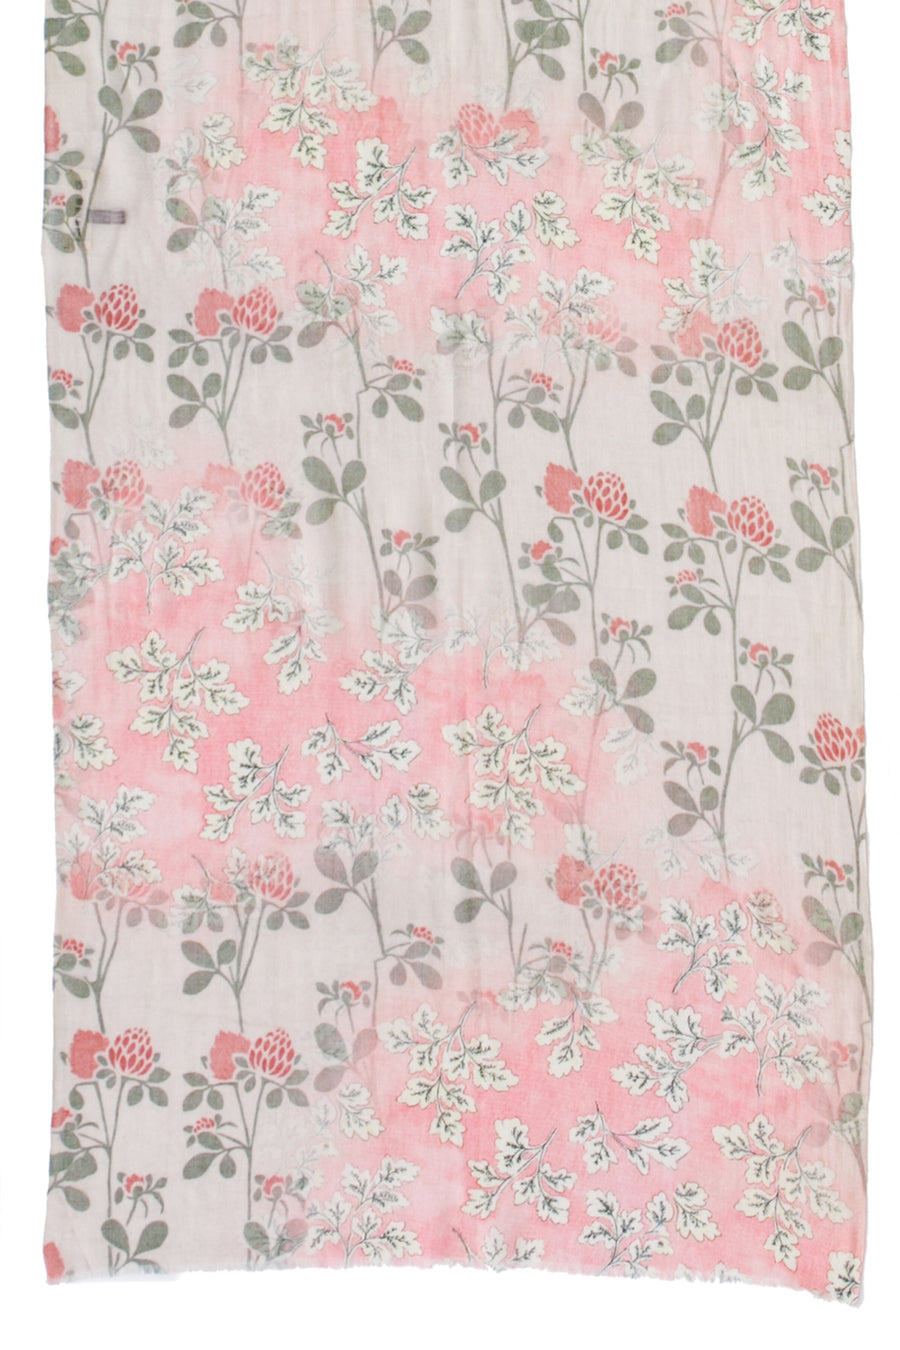 CHIE IMAI Scarf Collection - Floral Delight